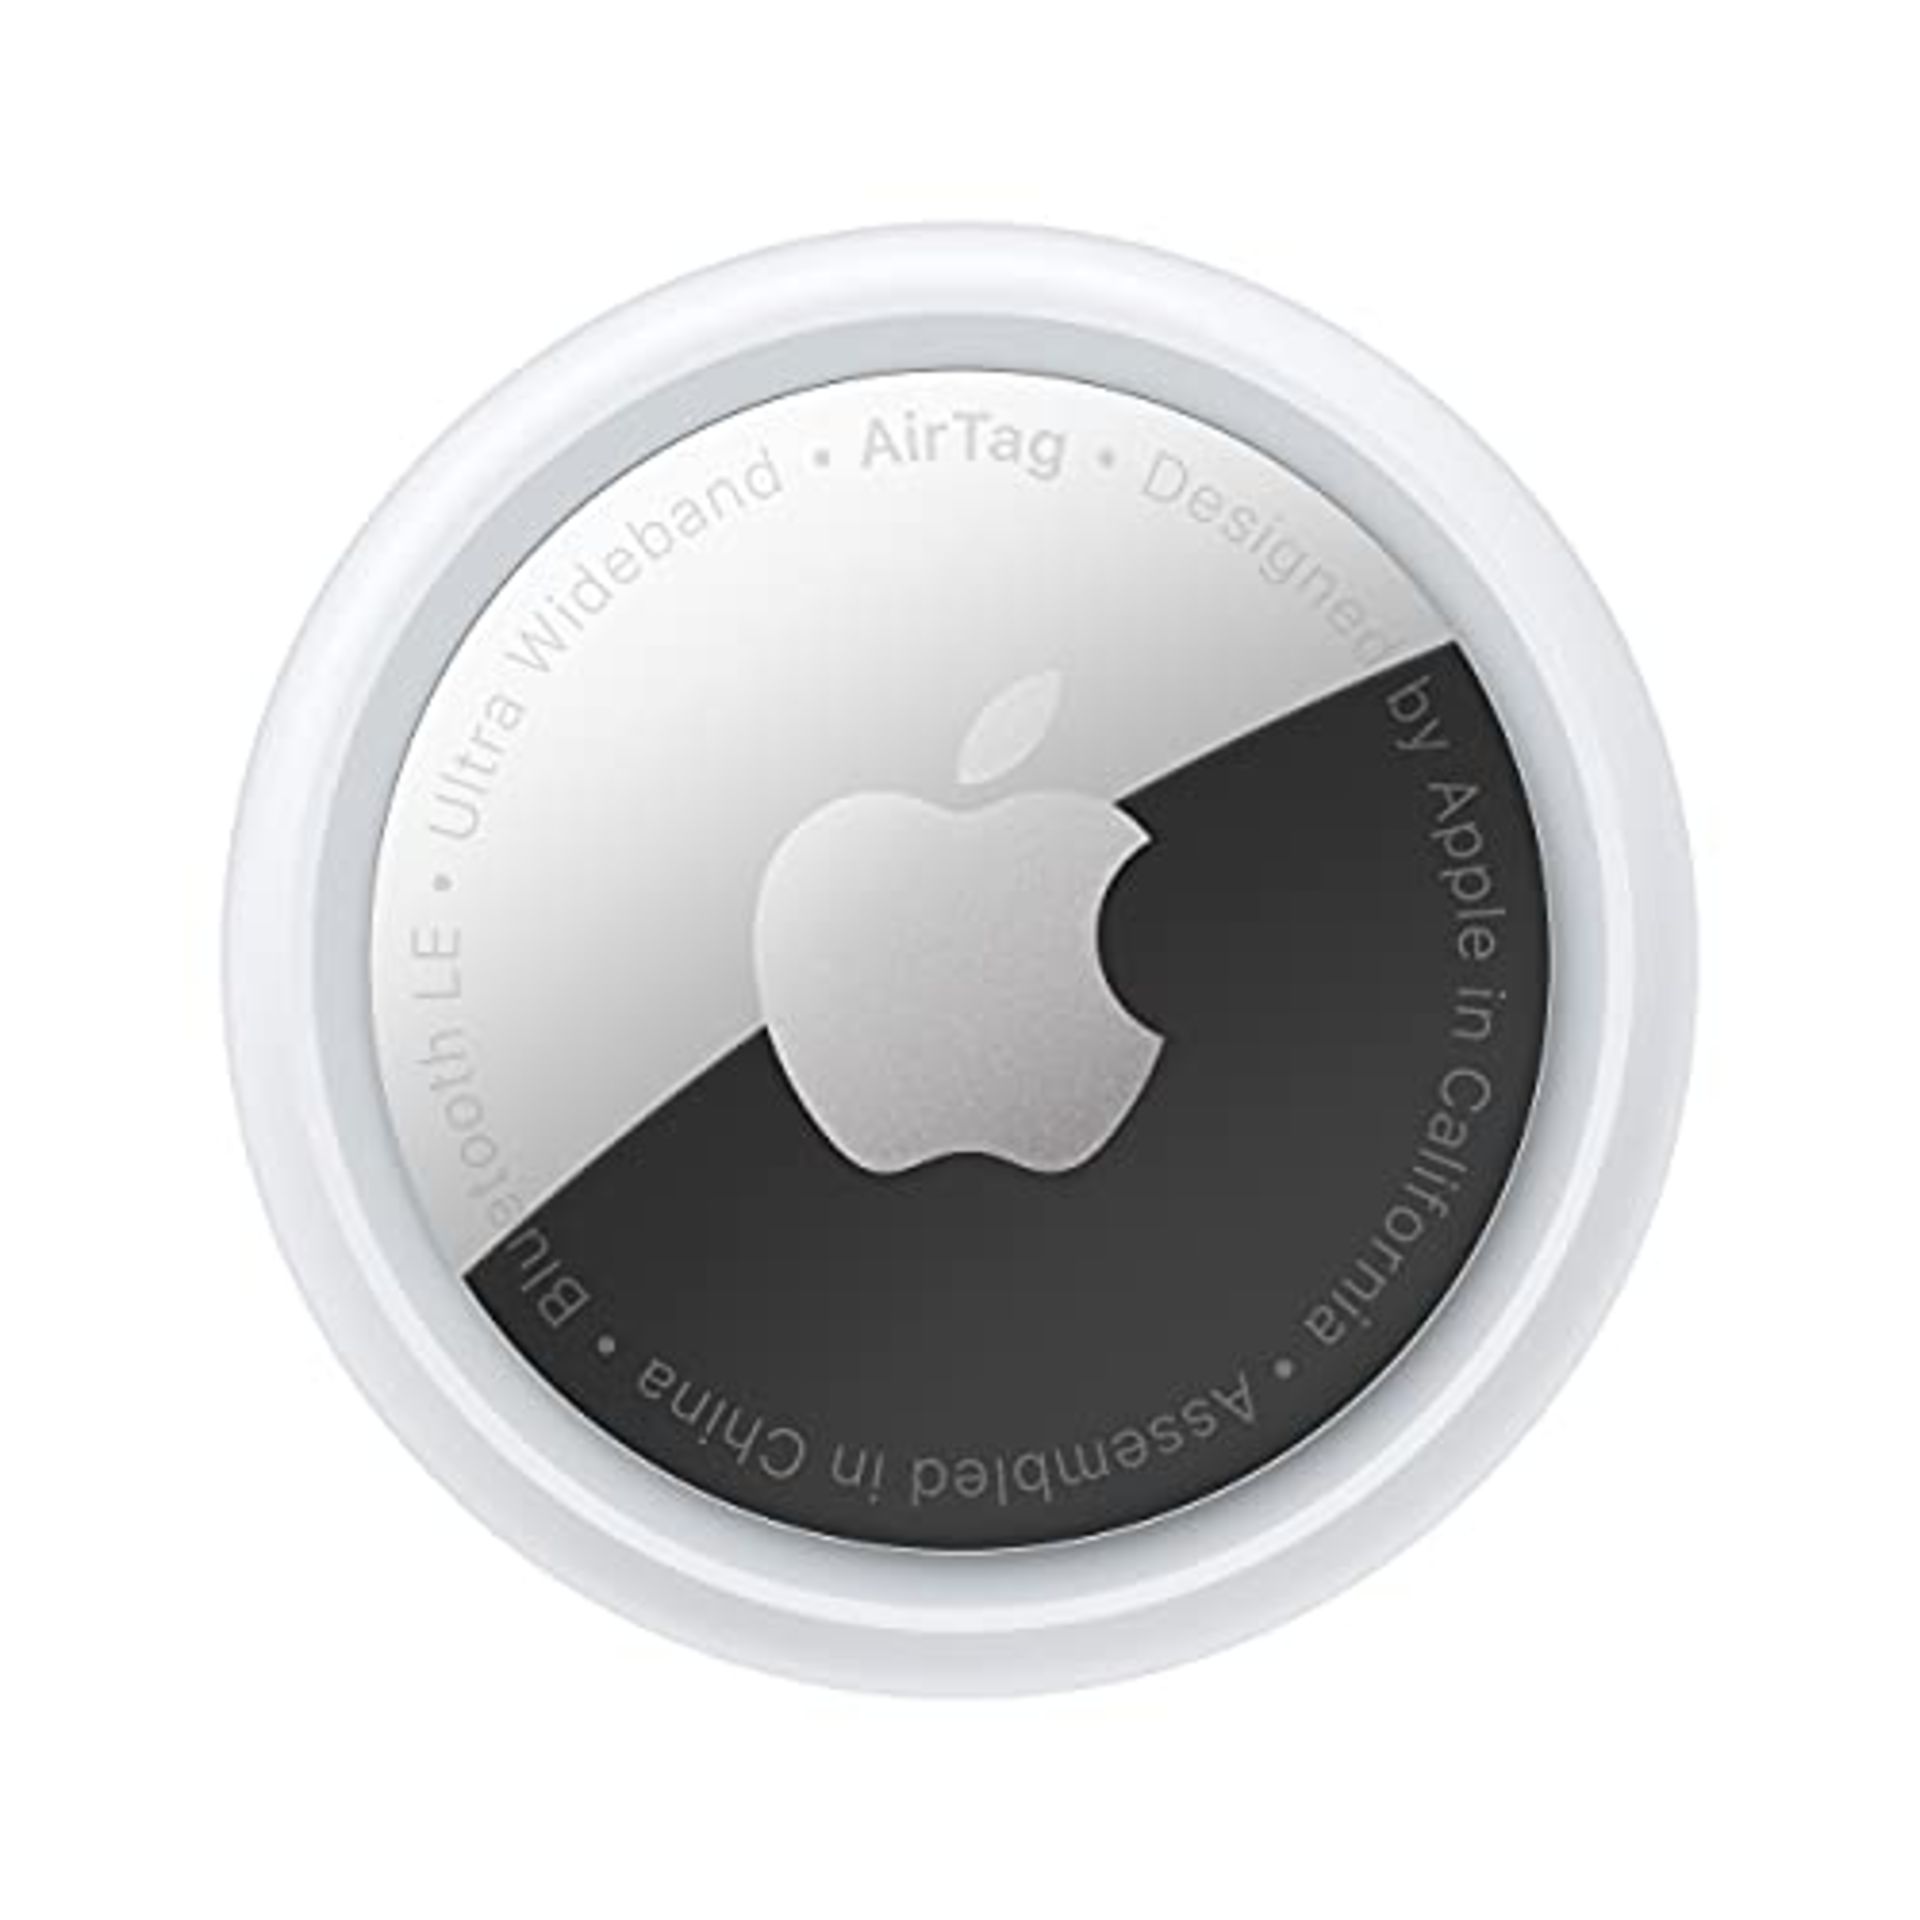 Apple AirTag. Track your keys, wallet, luggage, backpack. Replaceable battery. Water-r